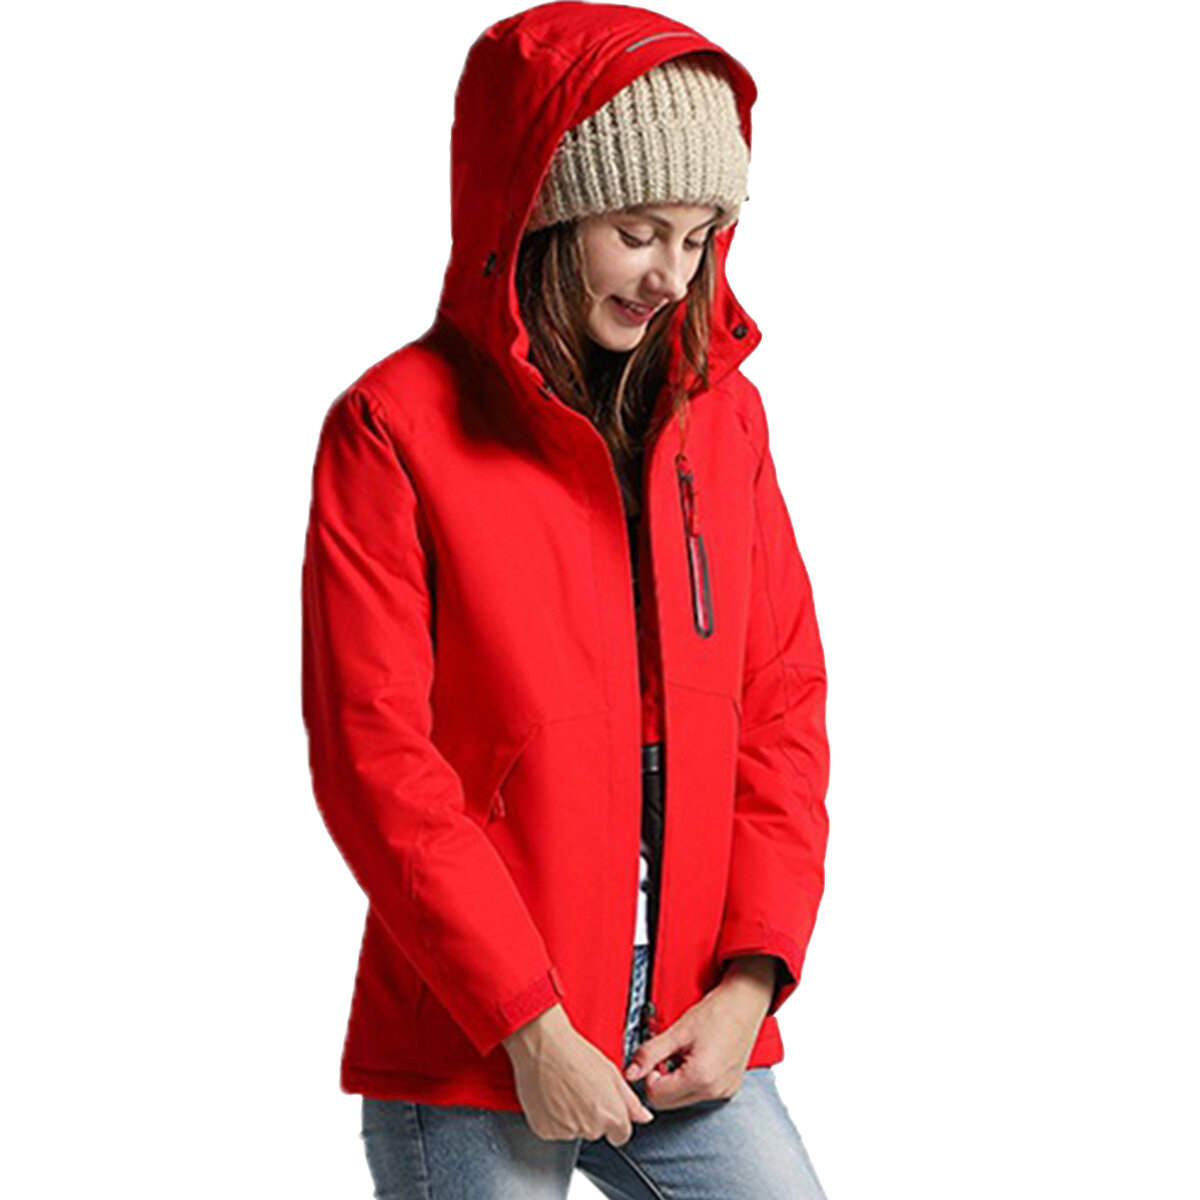 Women Winter Waterproof USB Infrared Heating Hooded Down Jacket Electric Thermal Clothing Coat For Sports Climbing Hikin